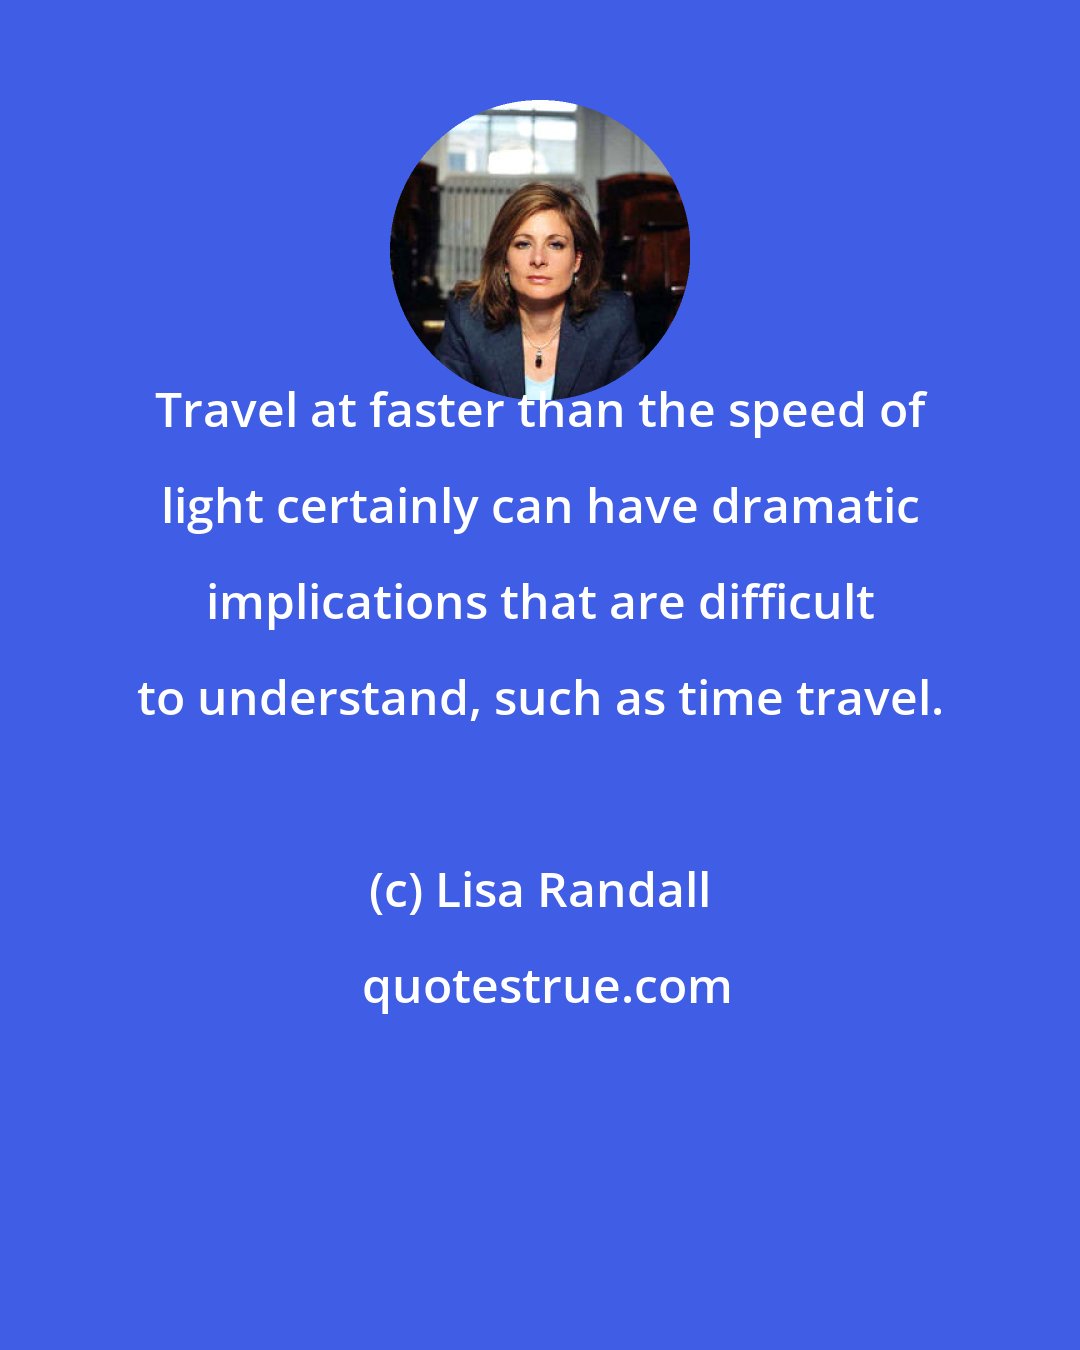 Lisa Randall: Travel at faster than the speed of light certainly can have dramatic implications that are difficult to understand, such as time travel.